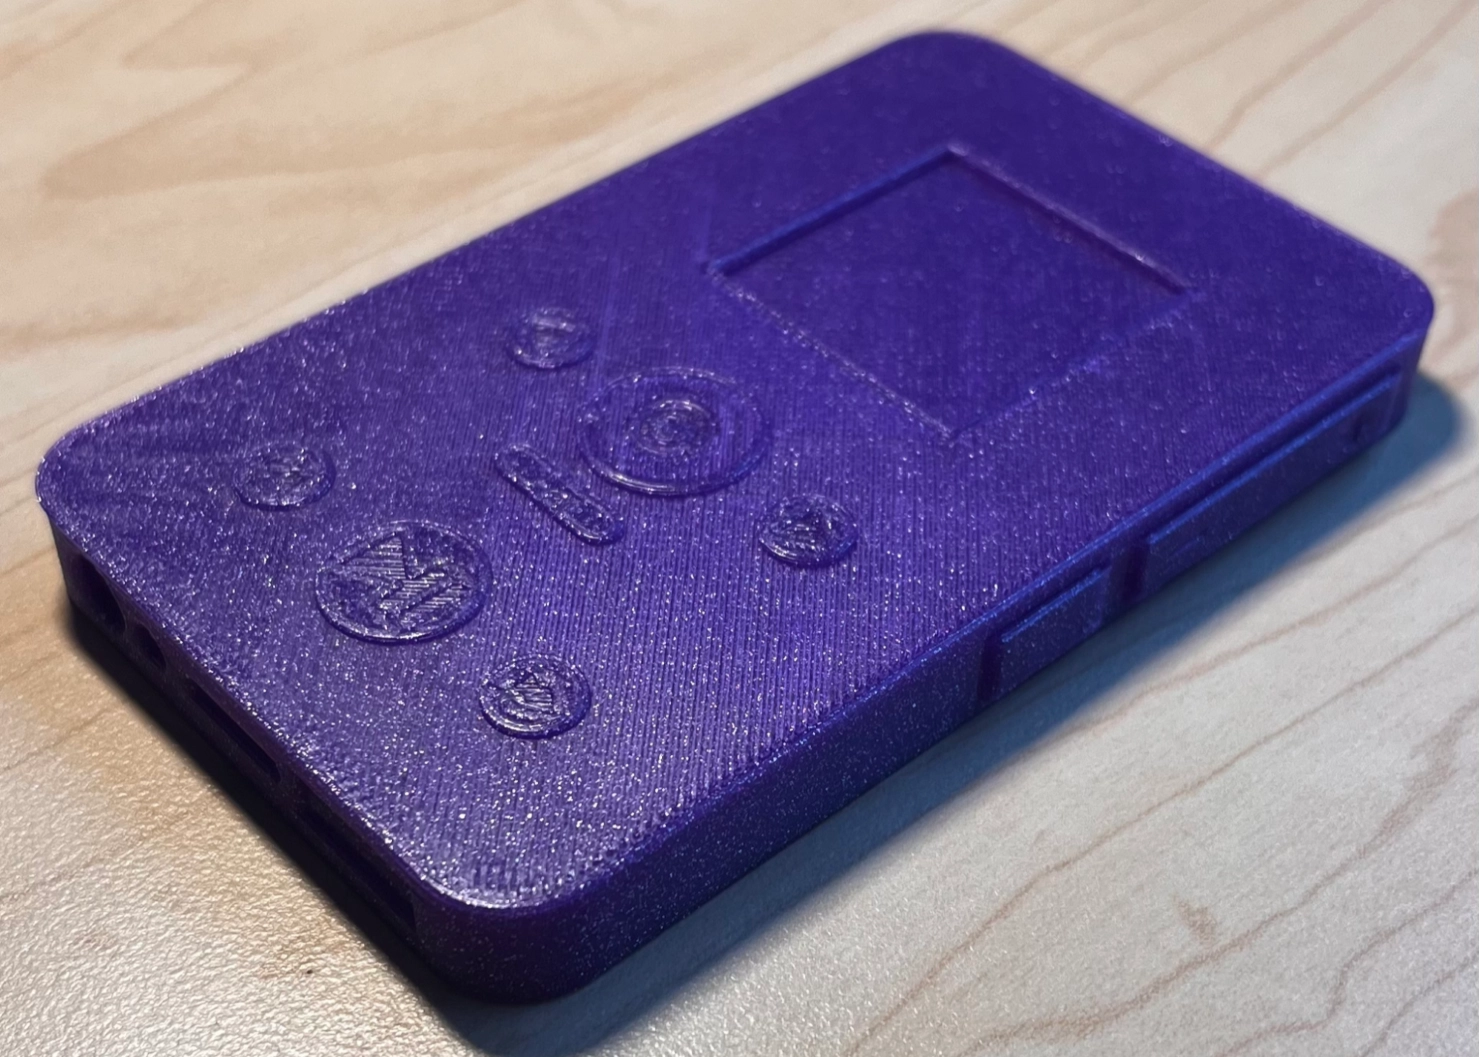 3D printed rectangular device with buttons and a indentation representing a screen